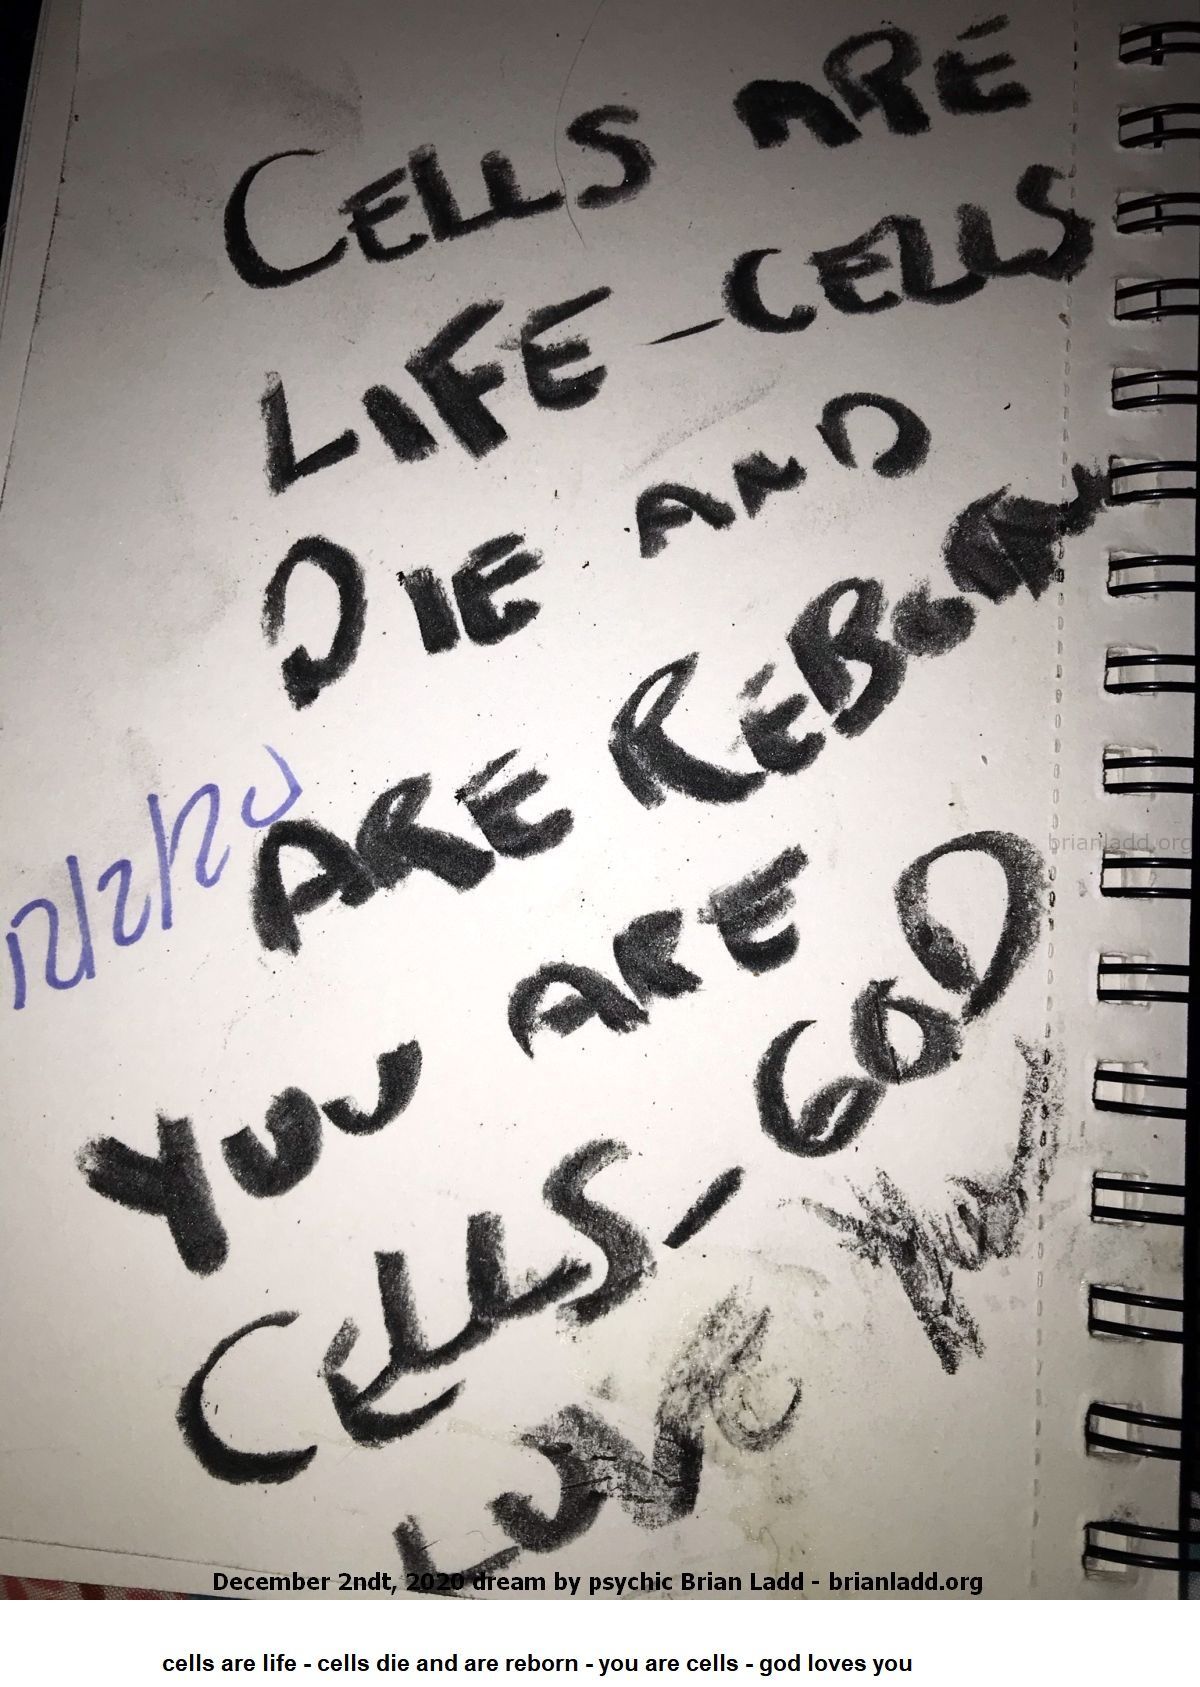 14123 2 December 2020 2 - Cells Are Life - Cells Die And Are Reborn - You Are Cells - God Loves You...
Cells Are Life - Cells Die And Are Reborn - You Are Cells - God Loves You
